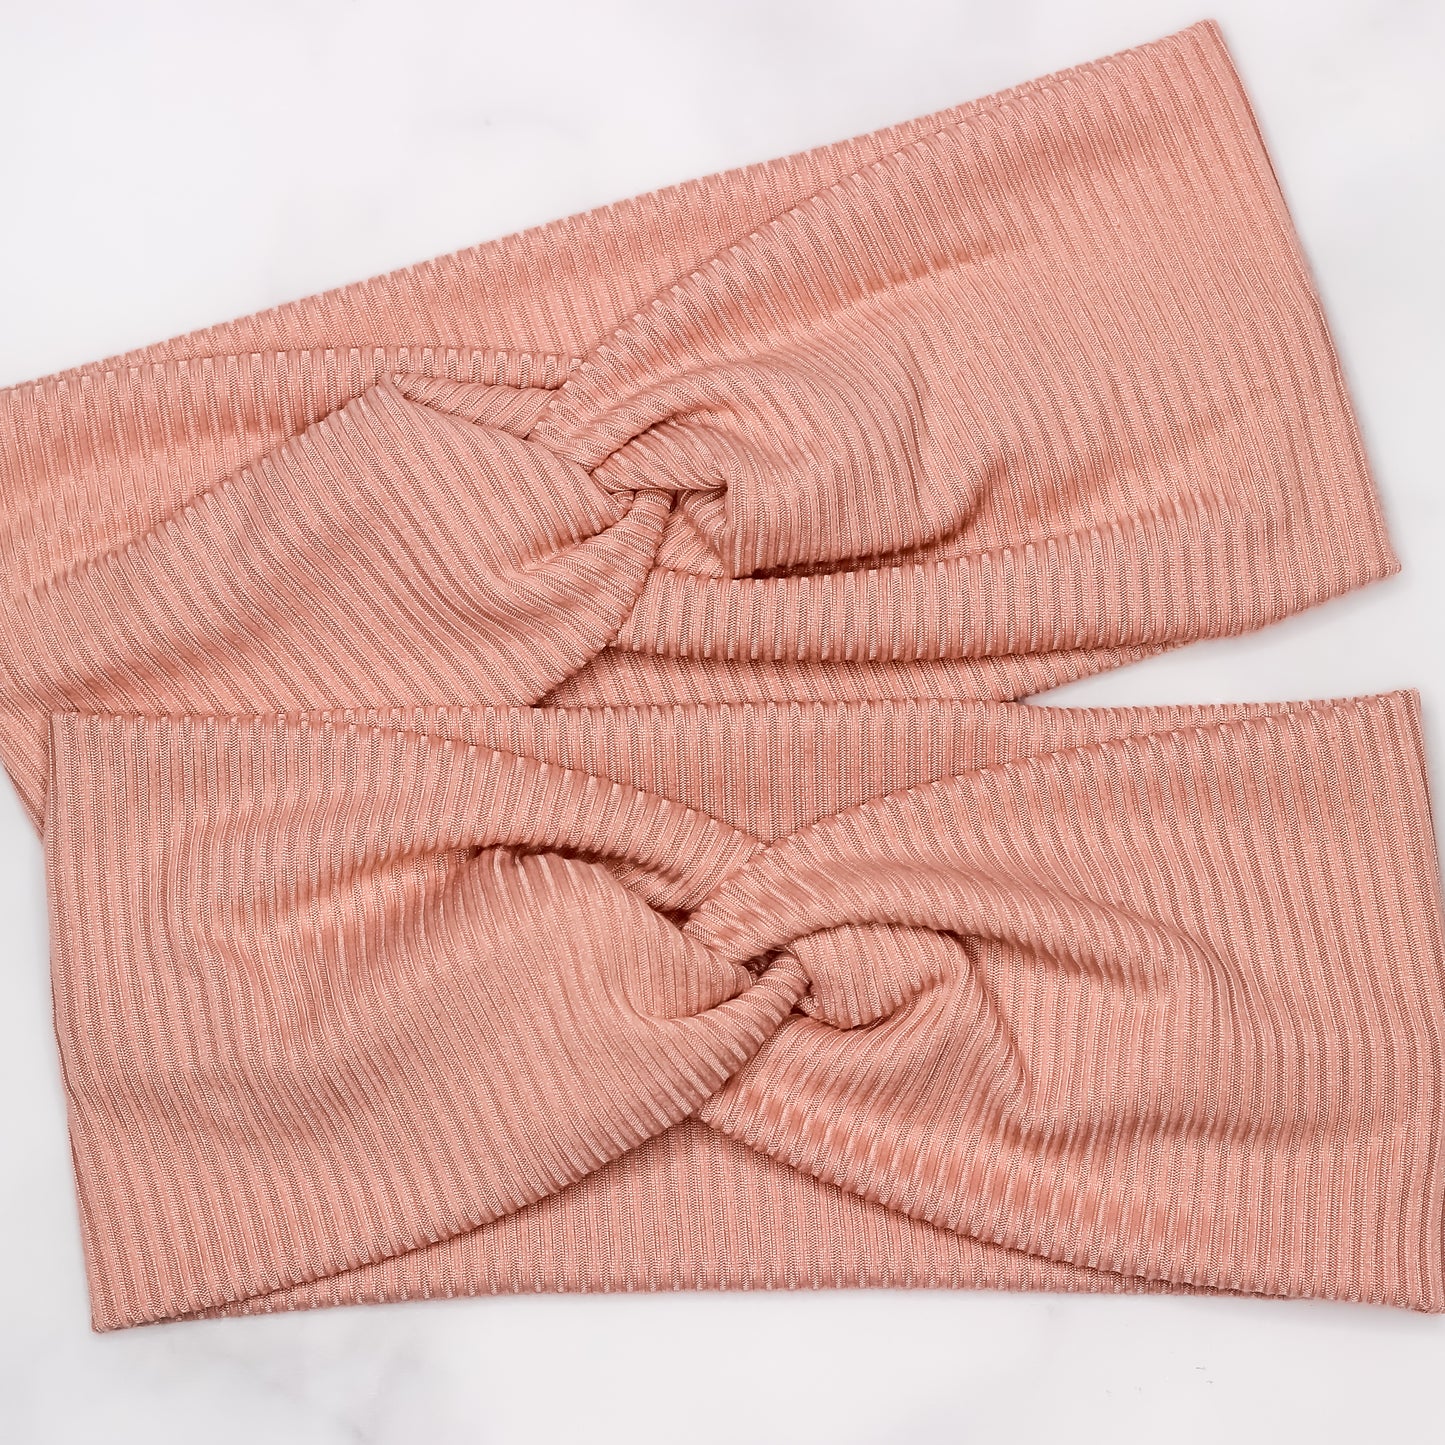 Twisted Headband - Ribbed Knit Solid Dusty Rose - Adult Size